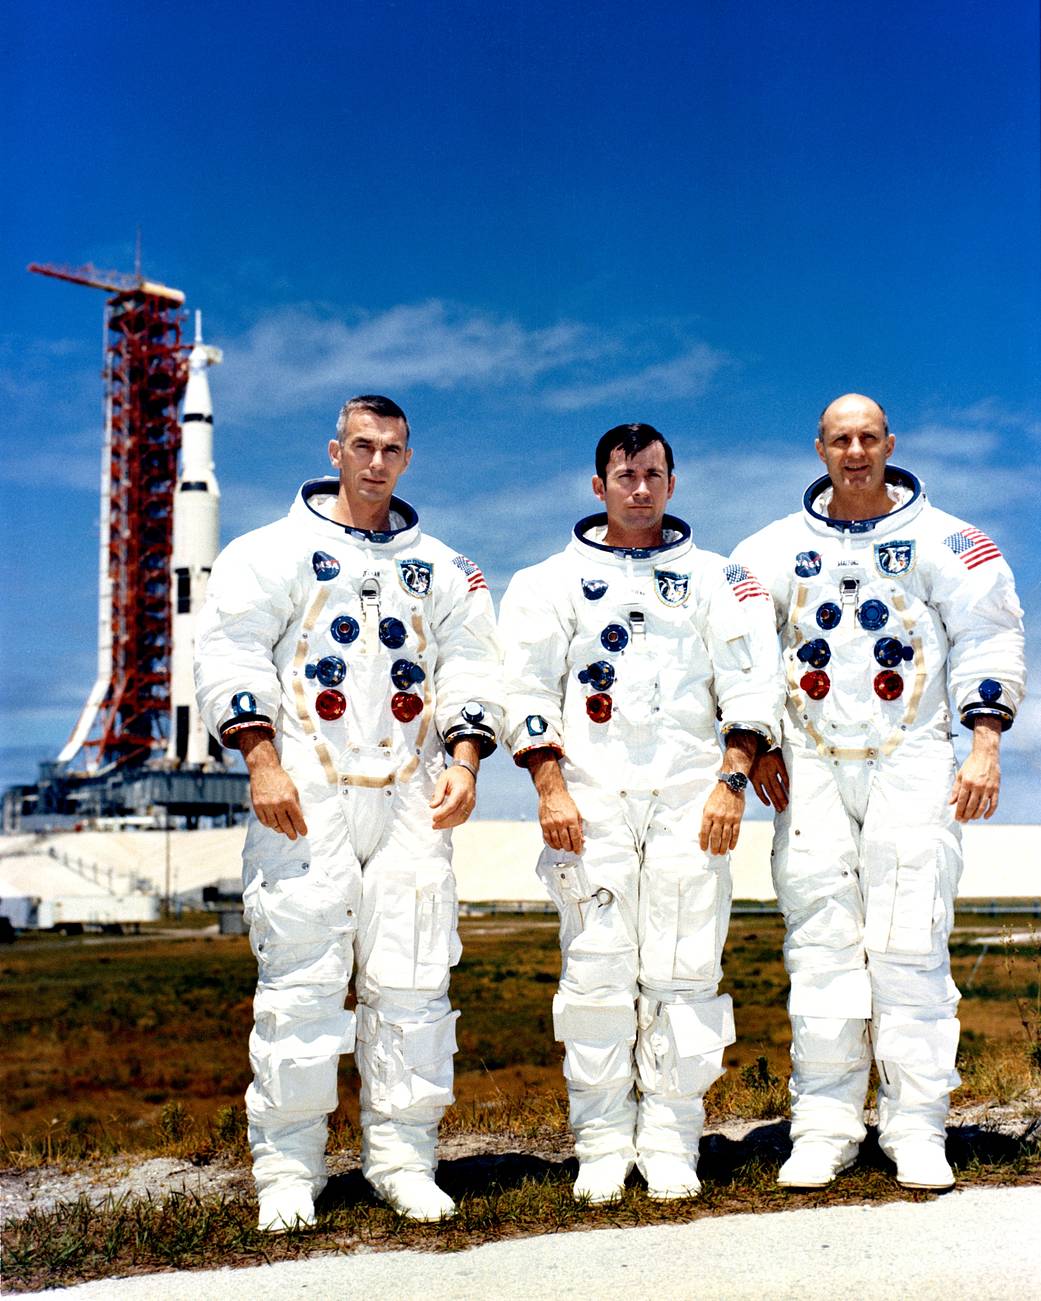 Apollo 10 crew portrait in spacesuits with rocket in background